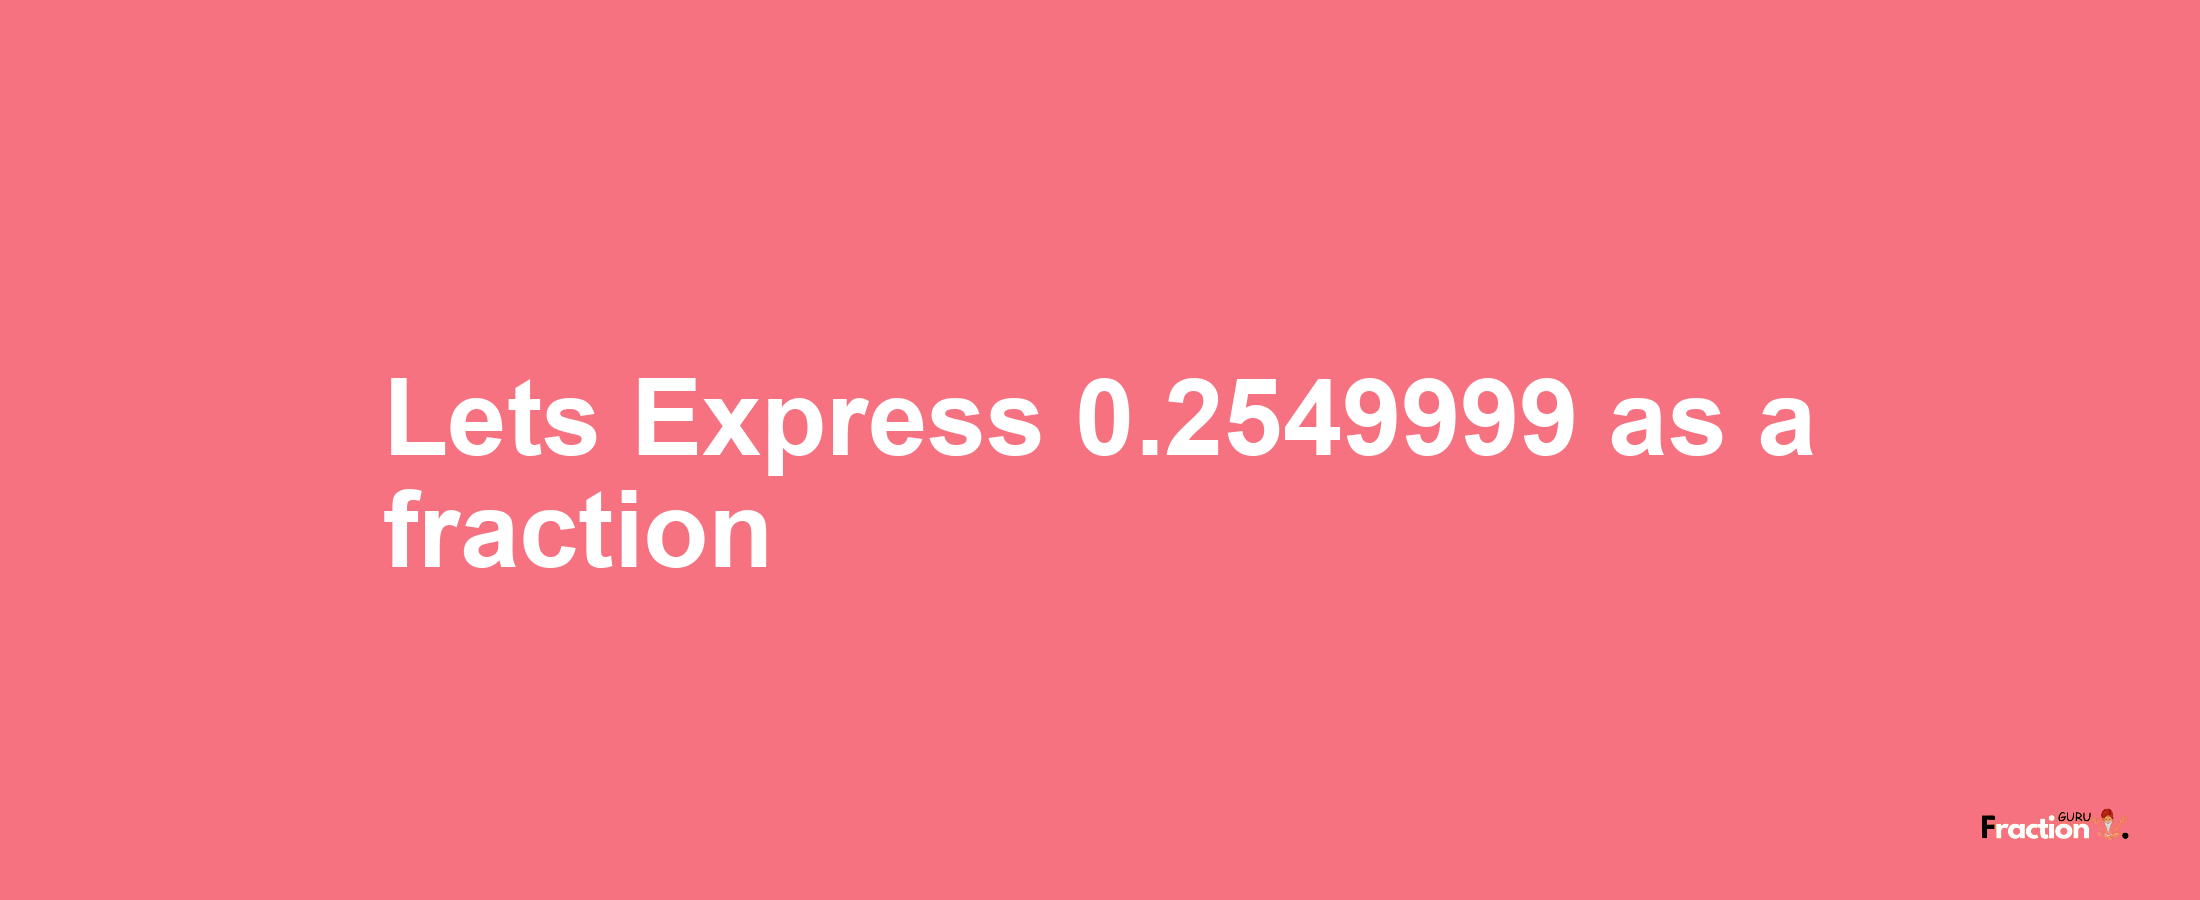 Lets Express 0.2549999 as afraction